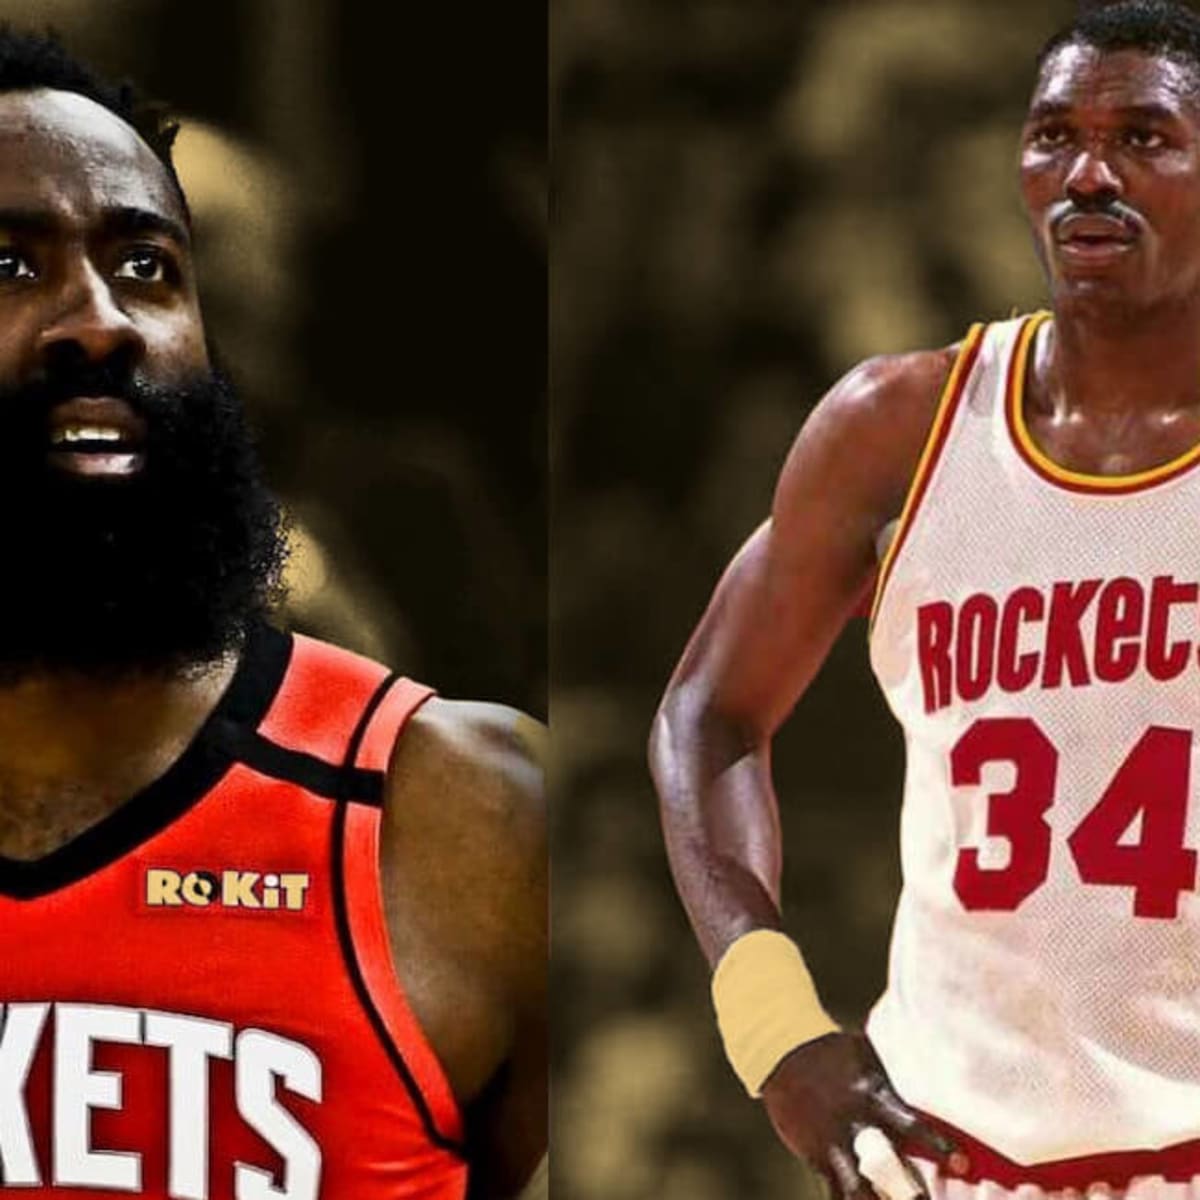 Hakeem Olajuwon Leads Rockets to First NBA Championship – Sneaker History -  Podcasts, Footwear News & Sneaker Culture